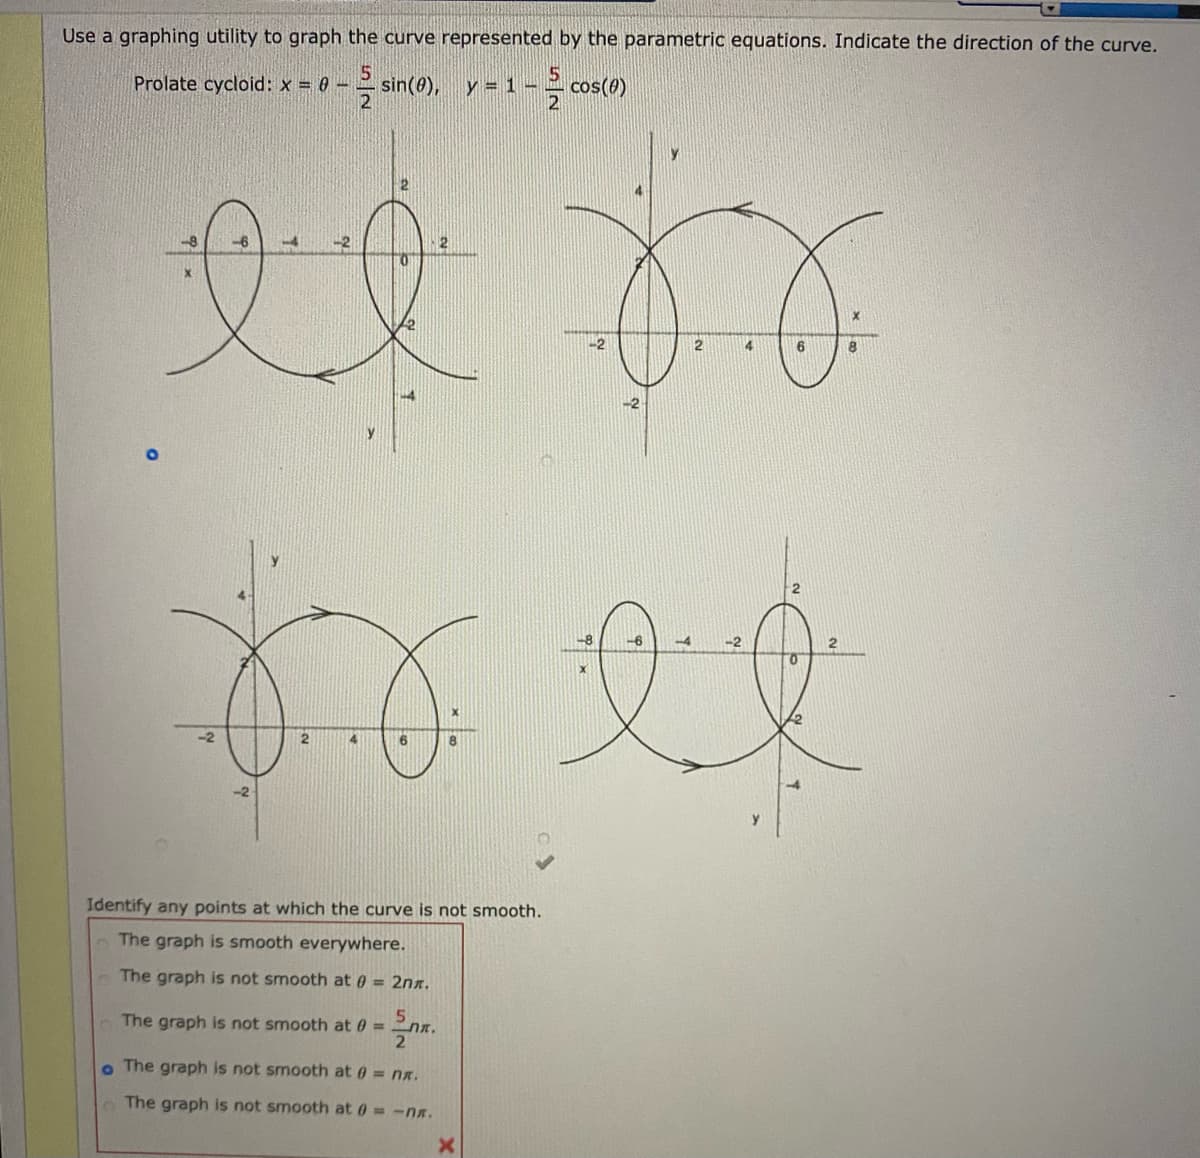 Use a graphing utility to graph the curve represented by the parametric equations. Indicate the direction of the curve.
sin(0),
-2 cos(0)
Prolate cycloid: x = 0 -
y =
-6
-2
2
8
-4
-2
4.
Identify any points at which the curve is not smooth.
The graph is smooth everywhere.
The graph is not smooth at 0 = 2nx.
The graph is not smooth at 0 =
o The graph is not smooth at 0 = nx.
The graph is not smooth at 0= -nx.
